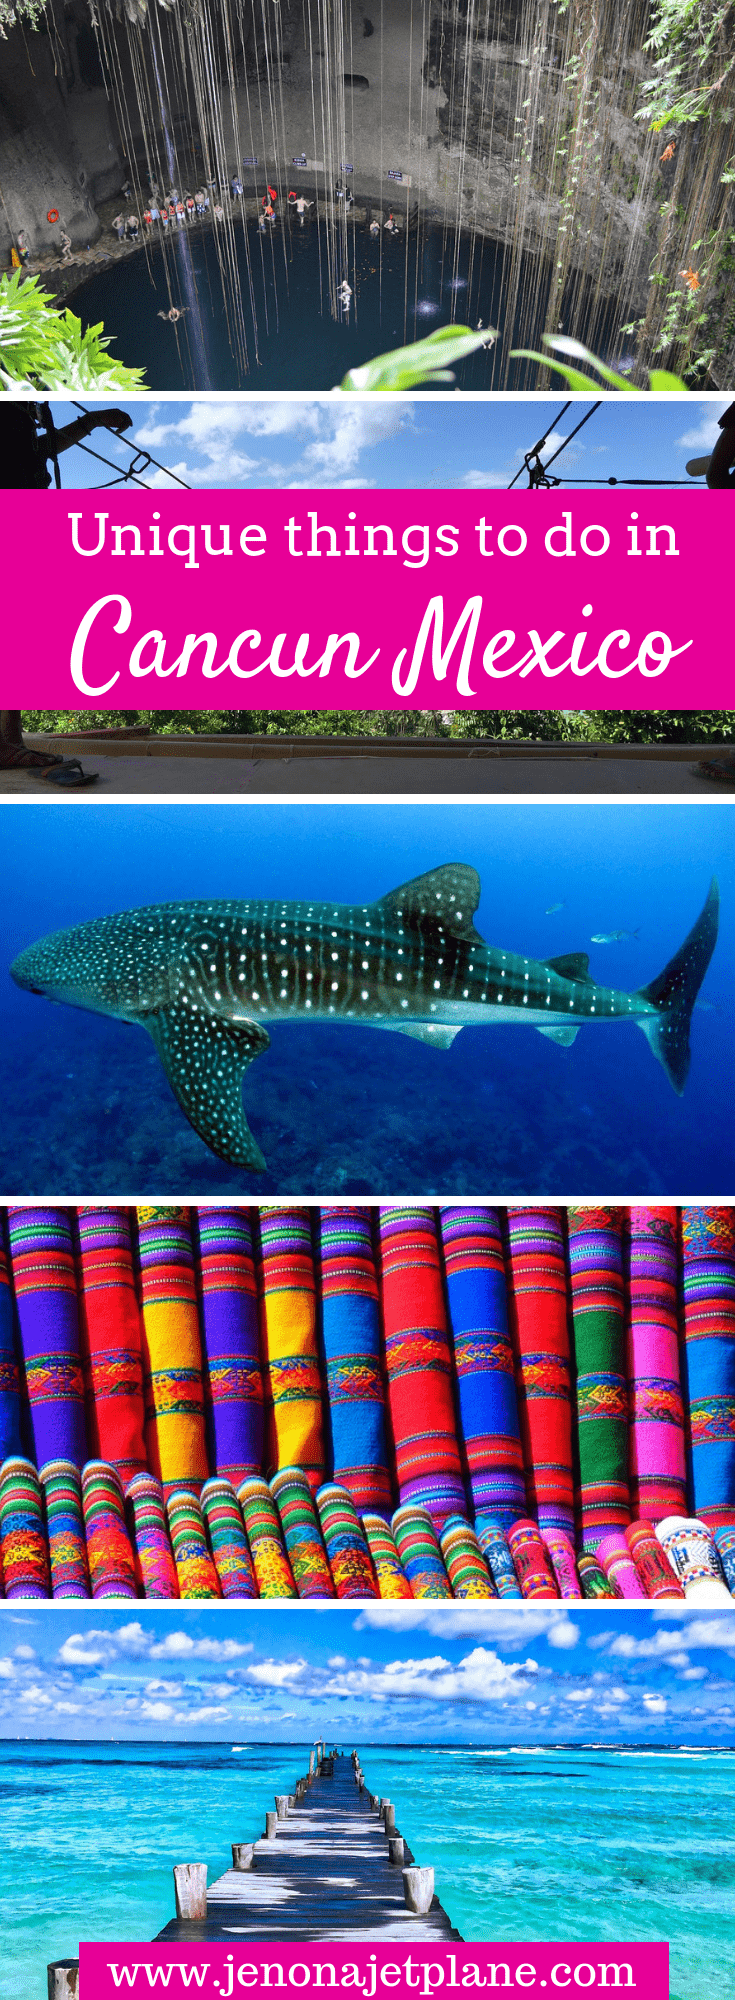 Looking for unique things to do in Cancun, Mexico away from the hotel strip? From swimming with whale sharks to seeing pink rivers on a day trip to Las Coloradas, here are 9 unforgettable adventures in Cancun you can't miss. Save to your travel board for future reference. #cancun #cancunmexico #mexicotravel #thingstodoinCancun #adventuretravel #bucketlist